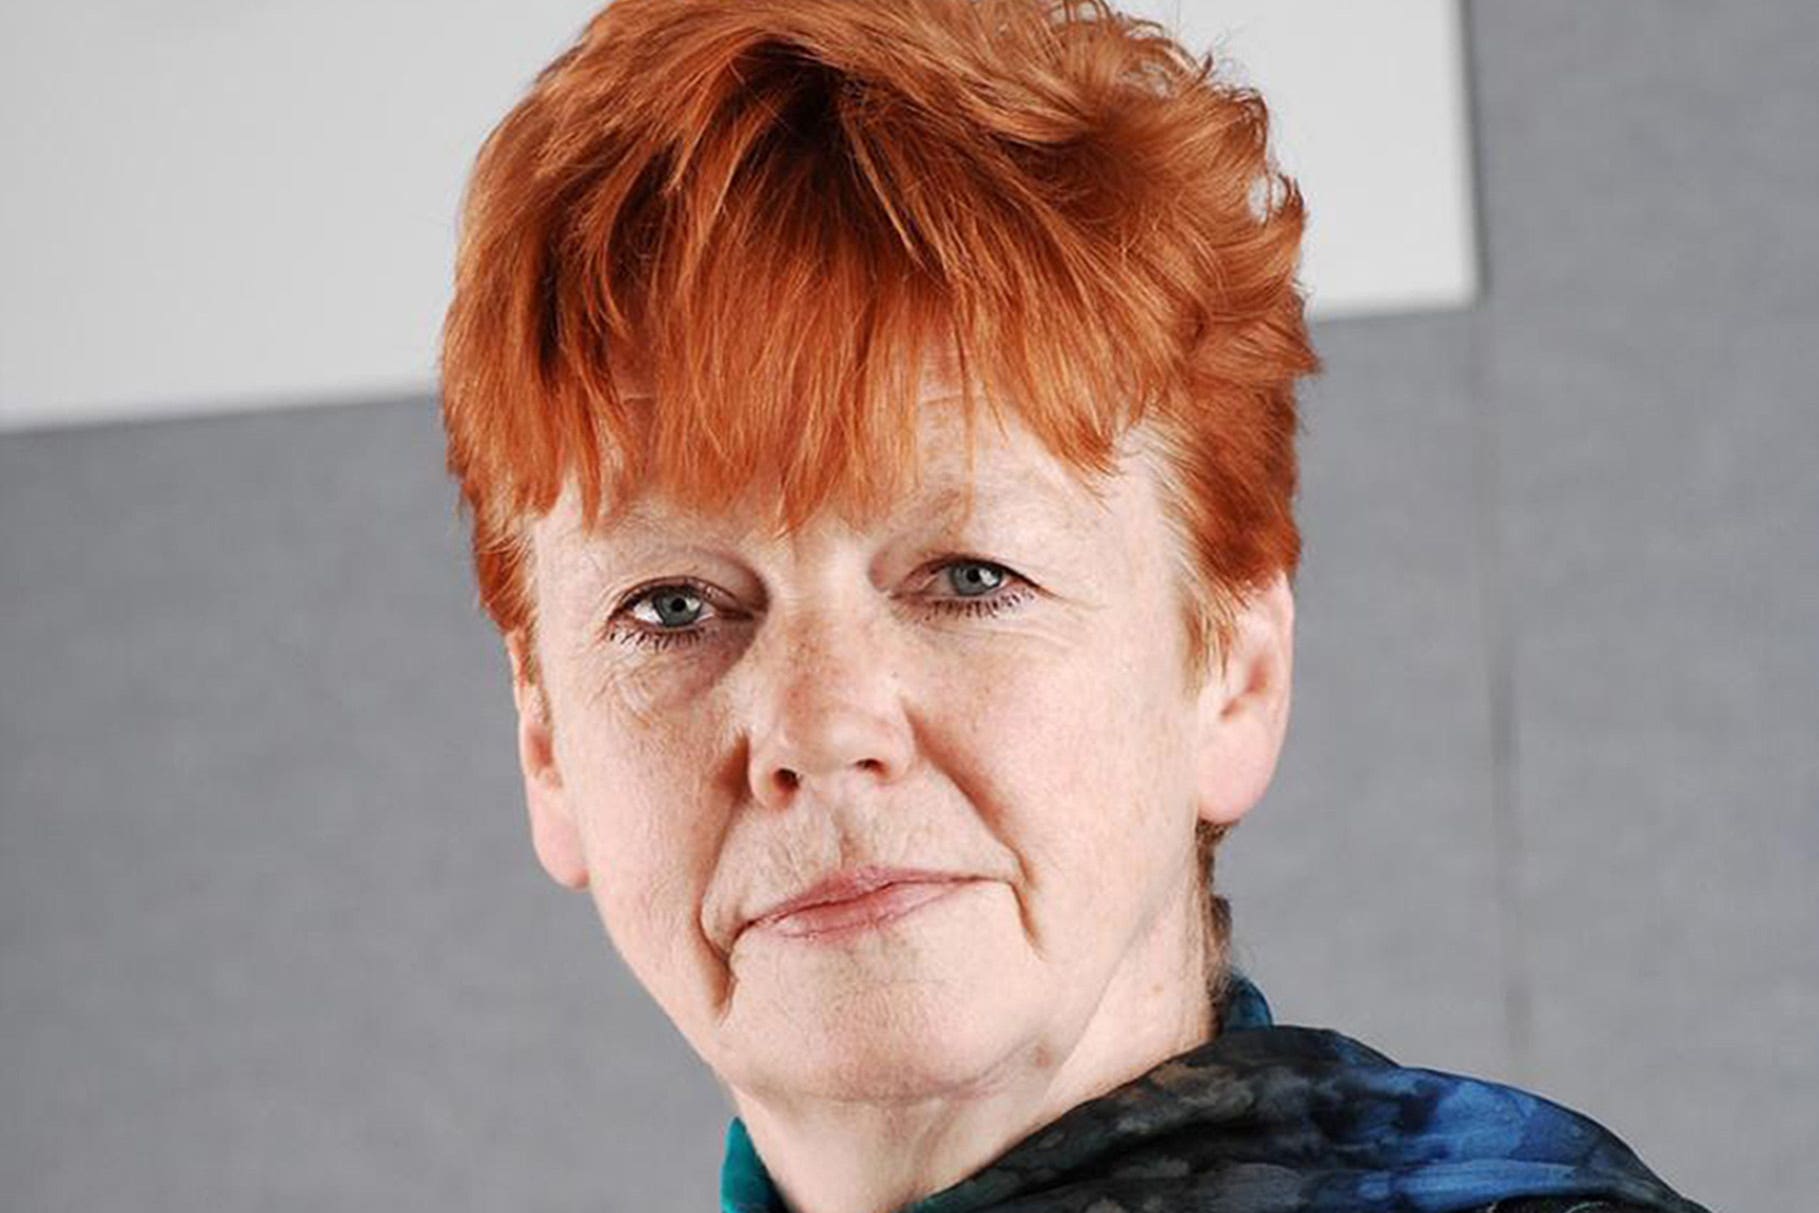 The former victims commissioner Dame Vera Baird